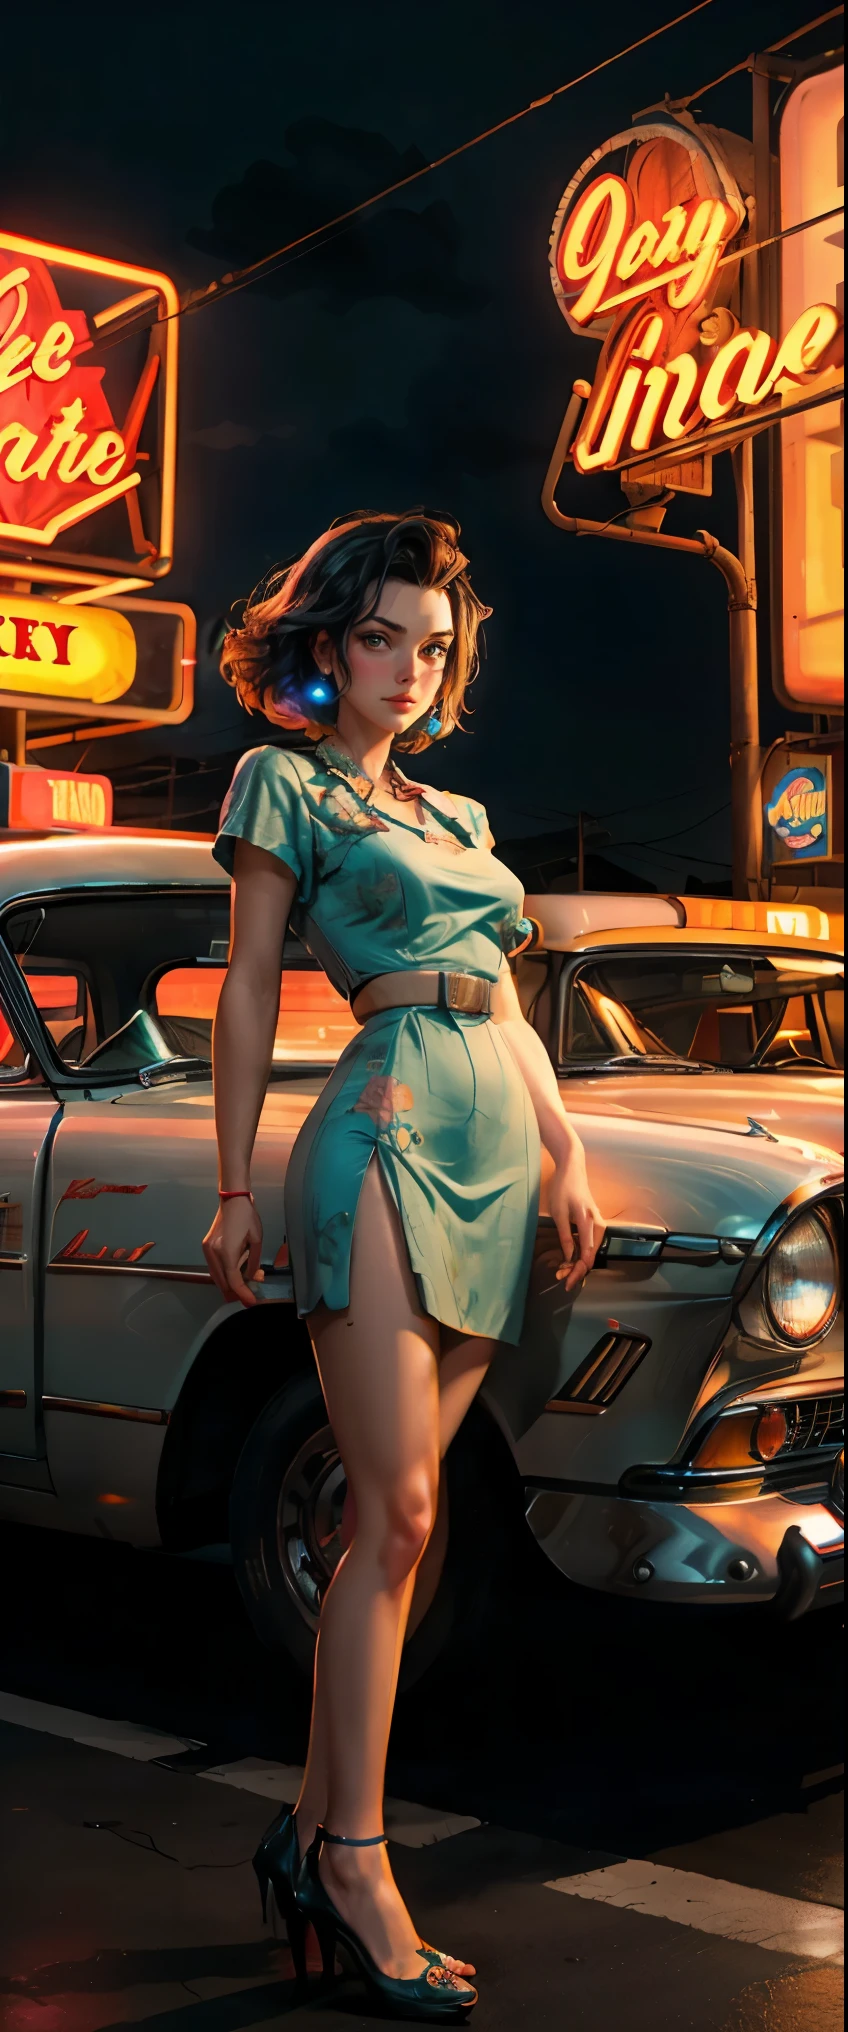 ((masterpiece, highest quality, Highest image quality, High resolution, photorealistic, Raw photo, 8K)), arafed view of a motel with a car parked in front of it, with neon signs, A woman waiting for a guest in front of a motel, seduction, short dress and high heels, route 6 6, neon signs, 1 9 5 0 s americana tourism, some have neon signs, neon lights outside, neon advertisements, gigantic neon signs, neon shops, by Arnie Swekel, few neon signs, neon signs in background,